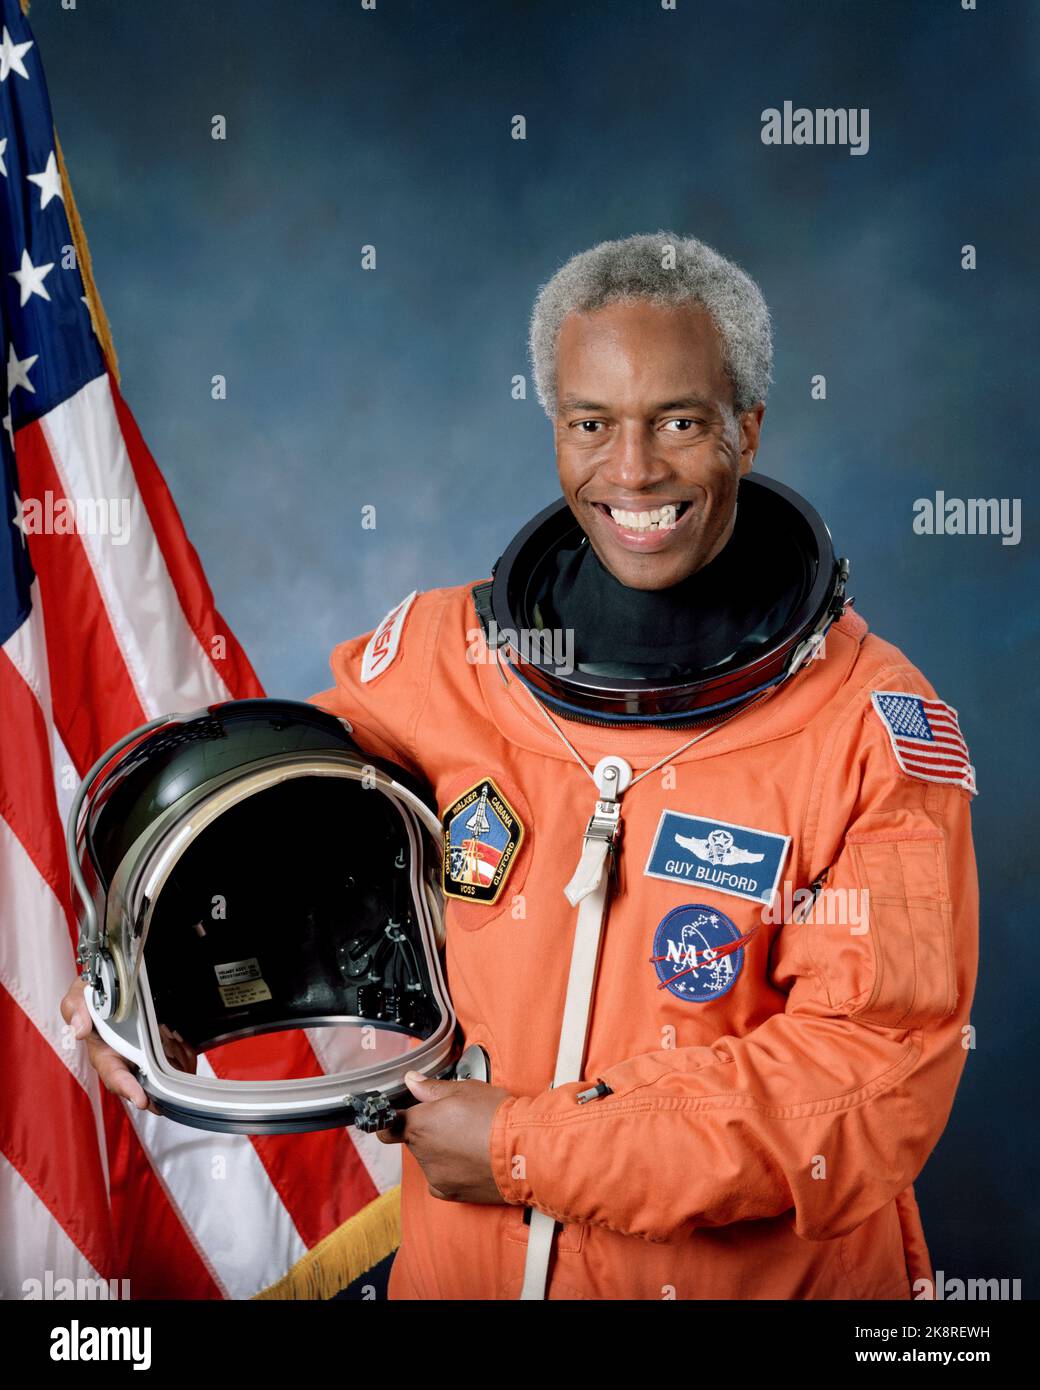 Official portrait of astronaut Guion S. Bluford. Bluford, a member of Astronaut Class 8 and the United States Air Force (USAF), poses in his launch and entry suit (LES) holding a launch and entry helmet (LEH) with the United States flag as a backdrop. Stock Photo